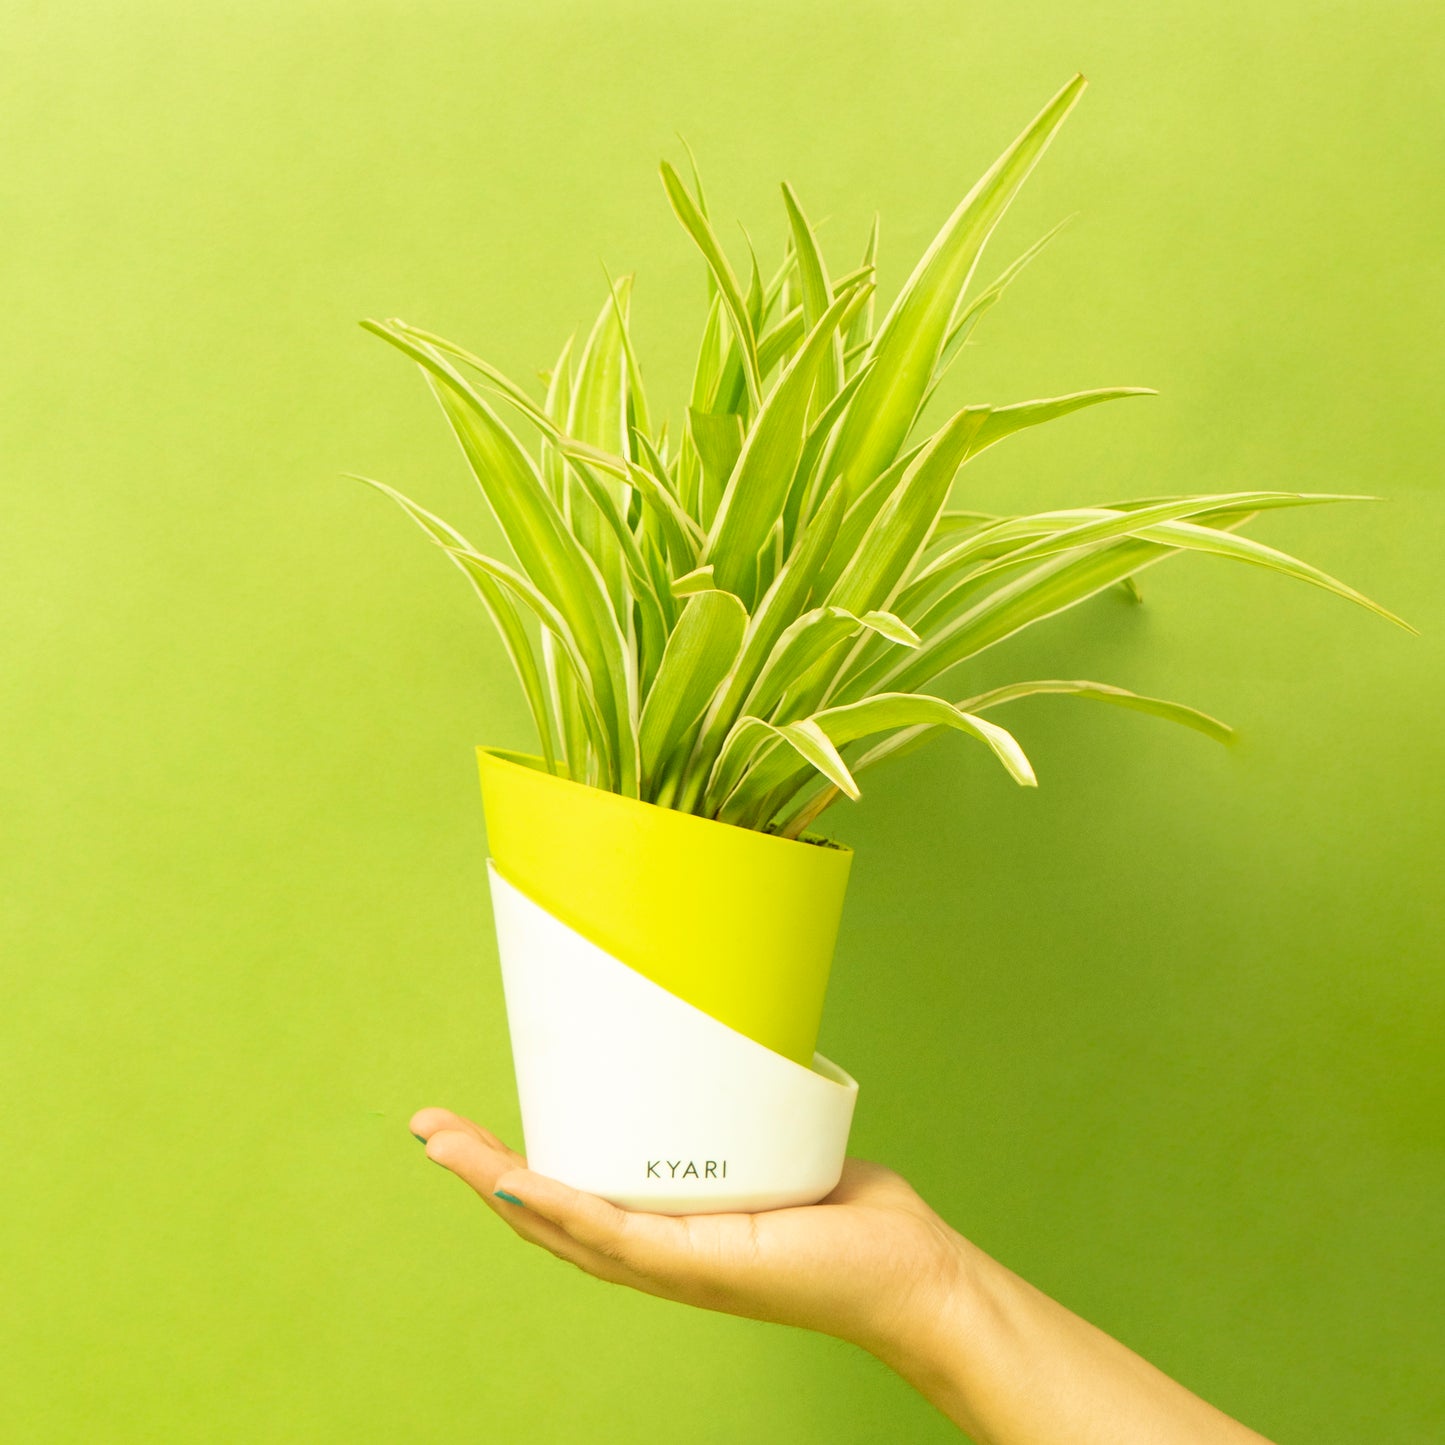 Spider Plant With Elite Self Watering Pot